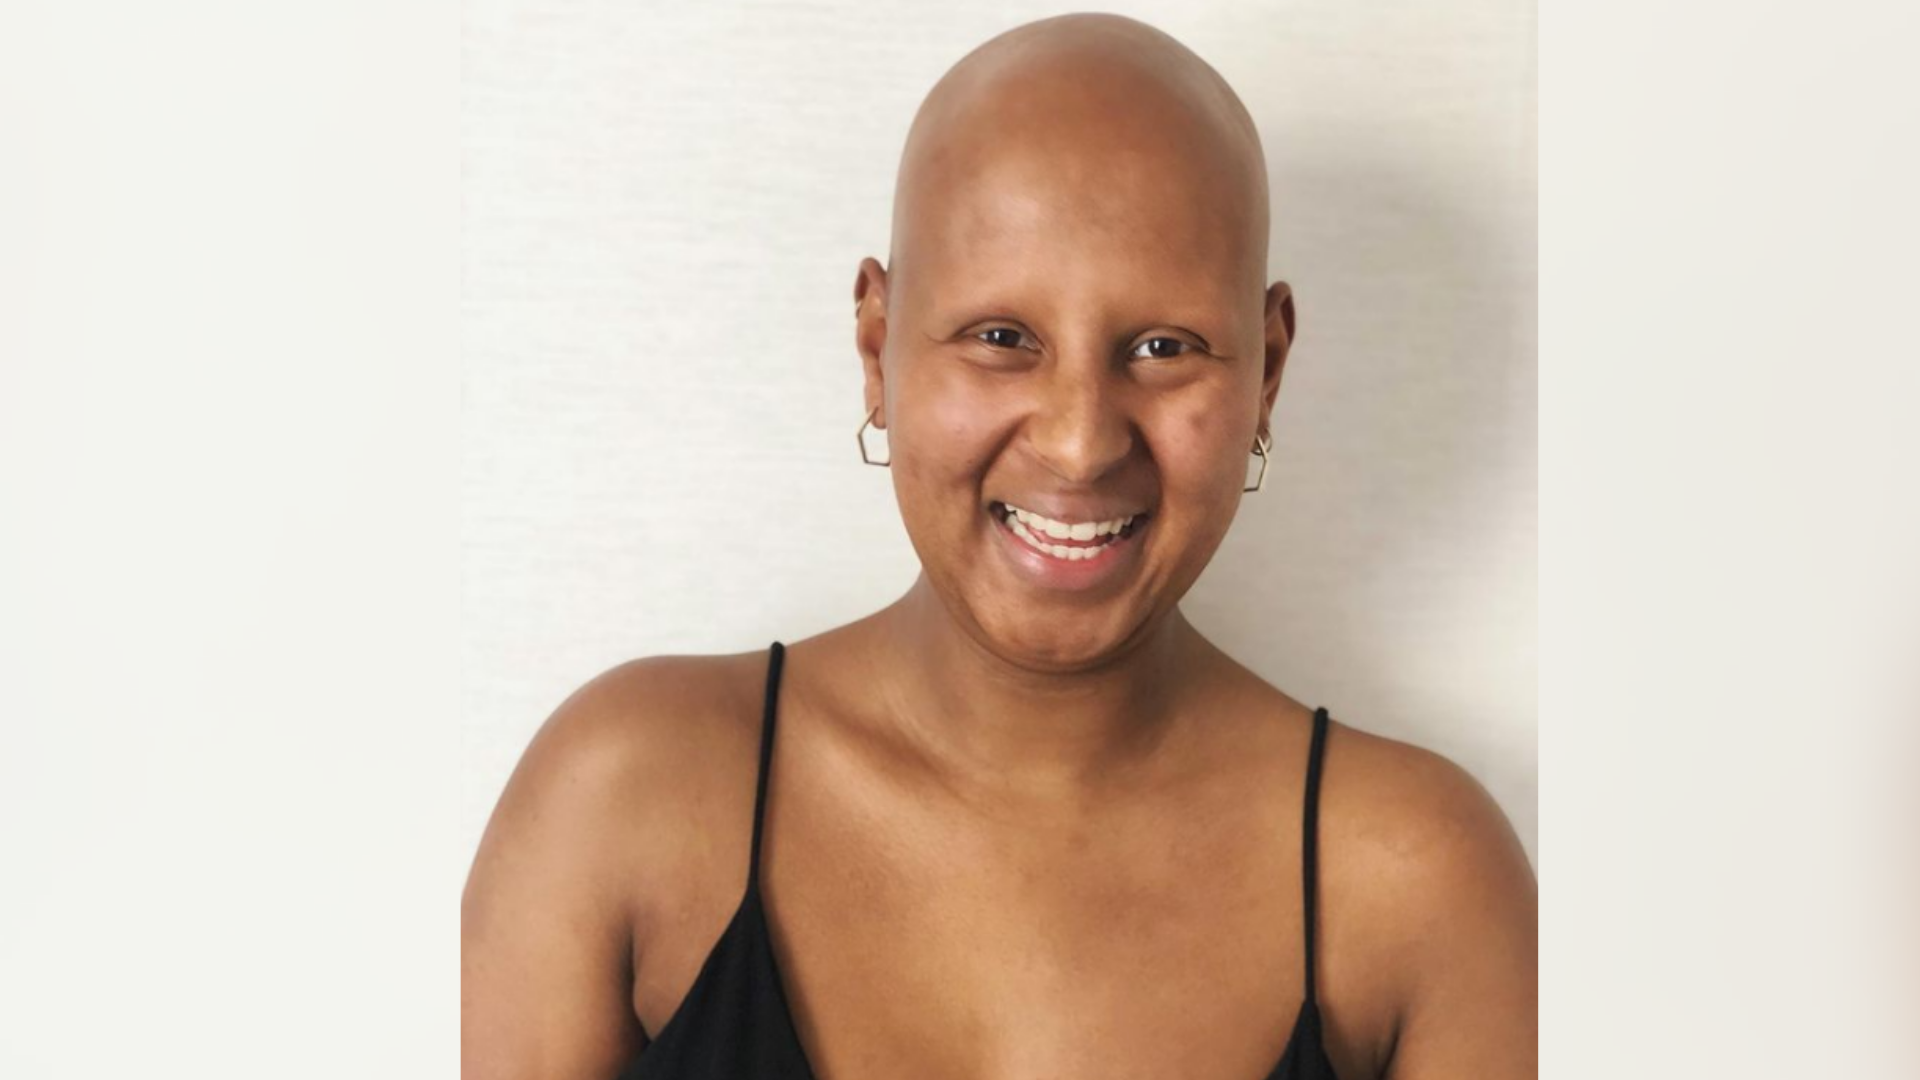 Jess is an actor with alopecia. She is wearing a black cami top and gold hoop earrings, and smiles at the camera. She is stood in front of a white background.